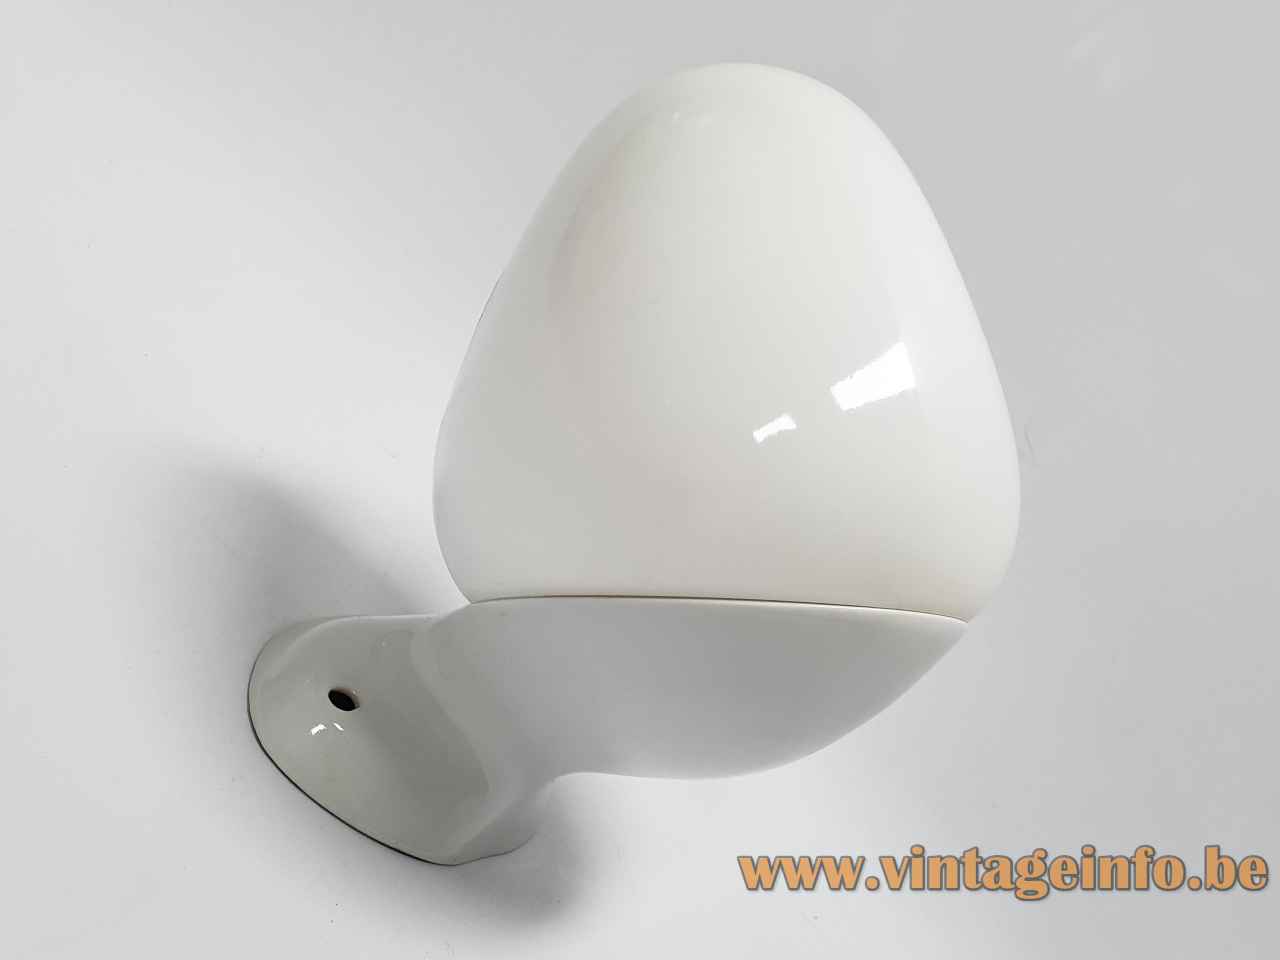 Wagenfeld WV 343 wall lamp white porcelain base mount opal glass lampshade 1950s 1960s Lindner Germany